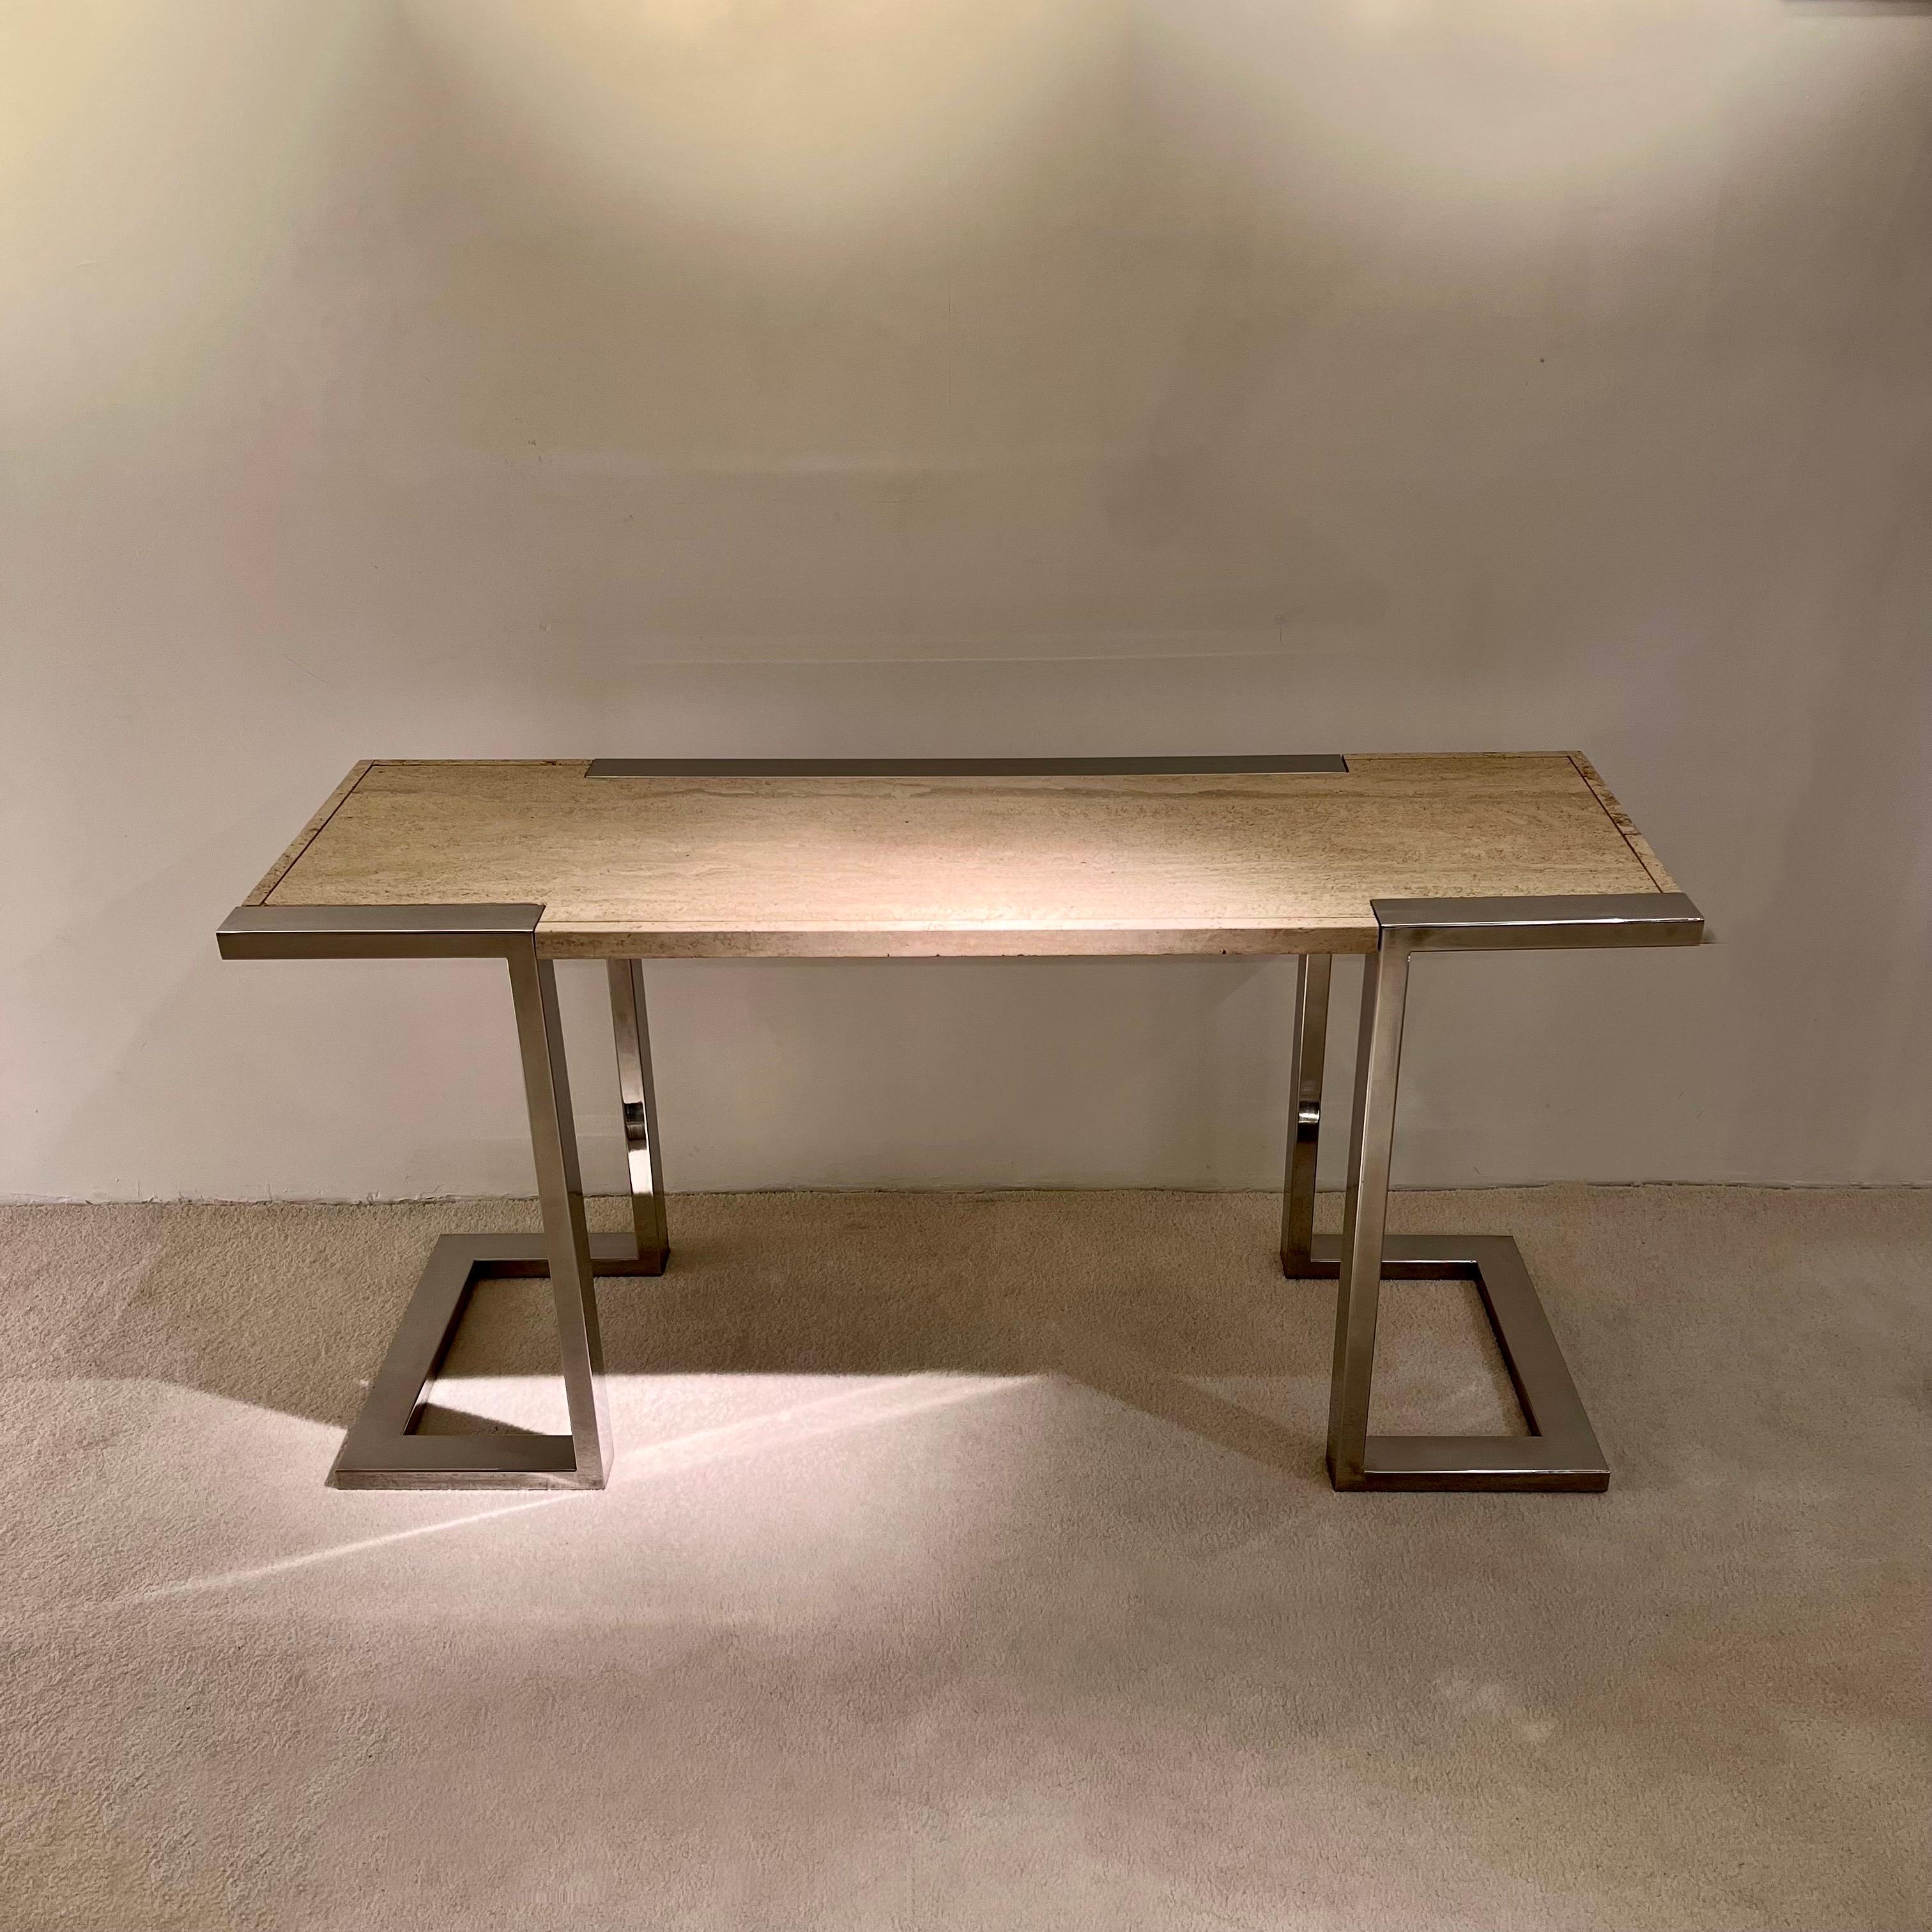 Console by Italian designer Alfredo Freda for Cittone Oggi, with a travertine top on a chromed metal structure, signed on the base.